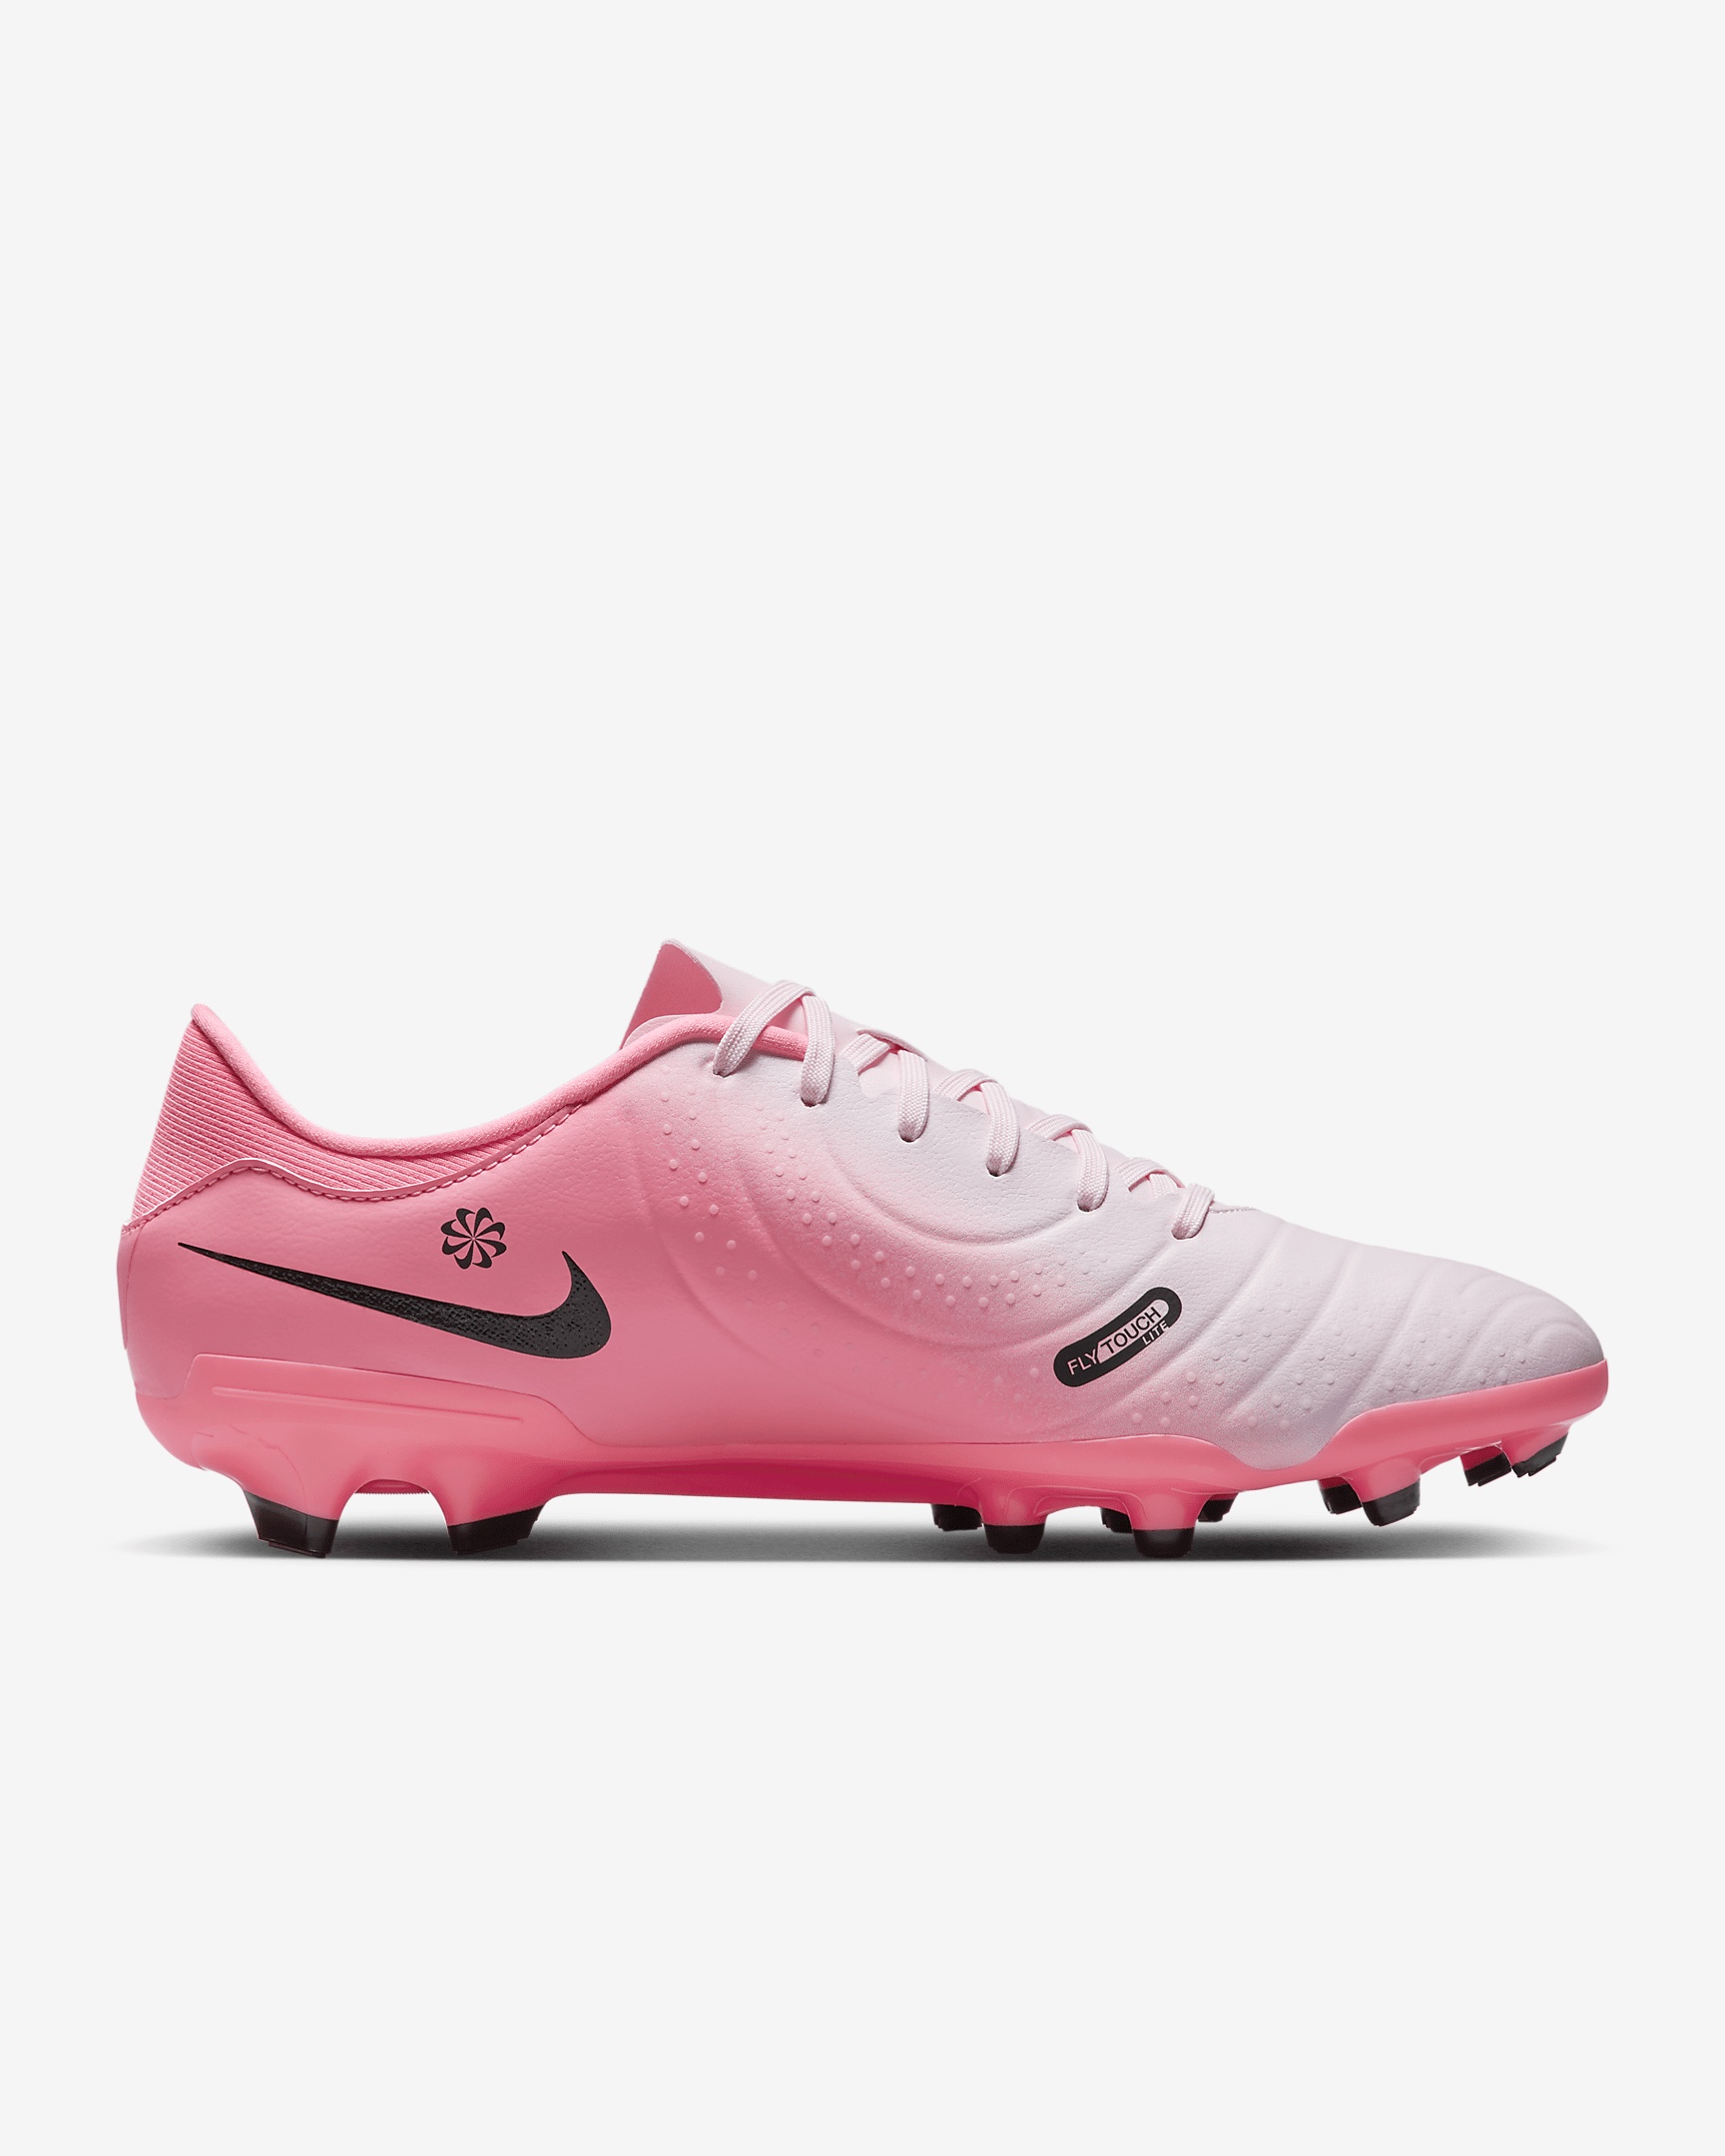 Nike Tiempo Legend 10 Academy MG Low-Top Soccer Cleats - 3